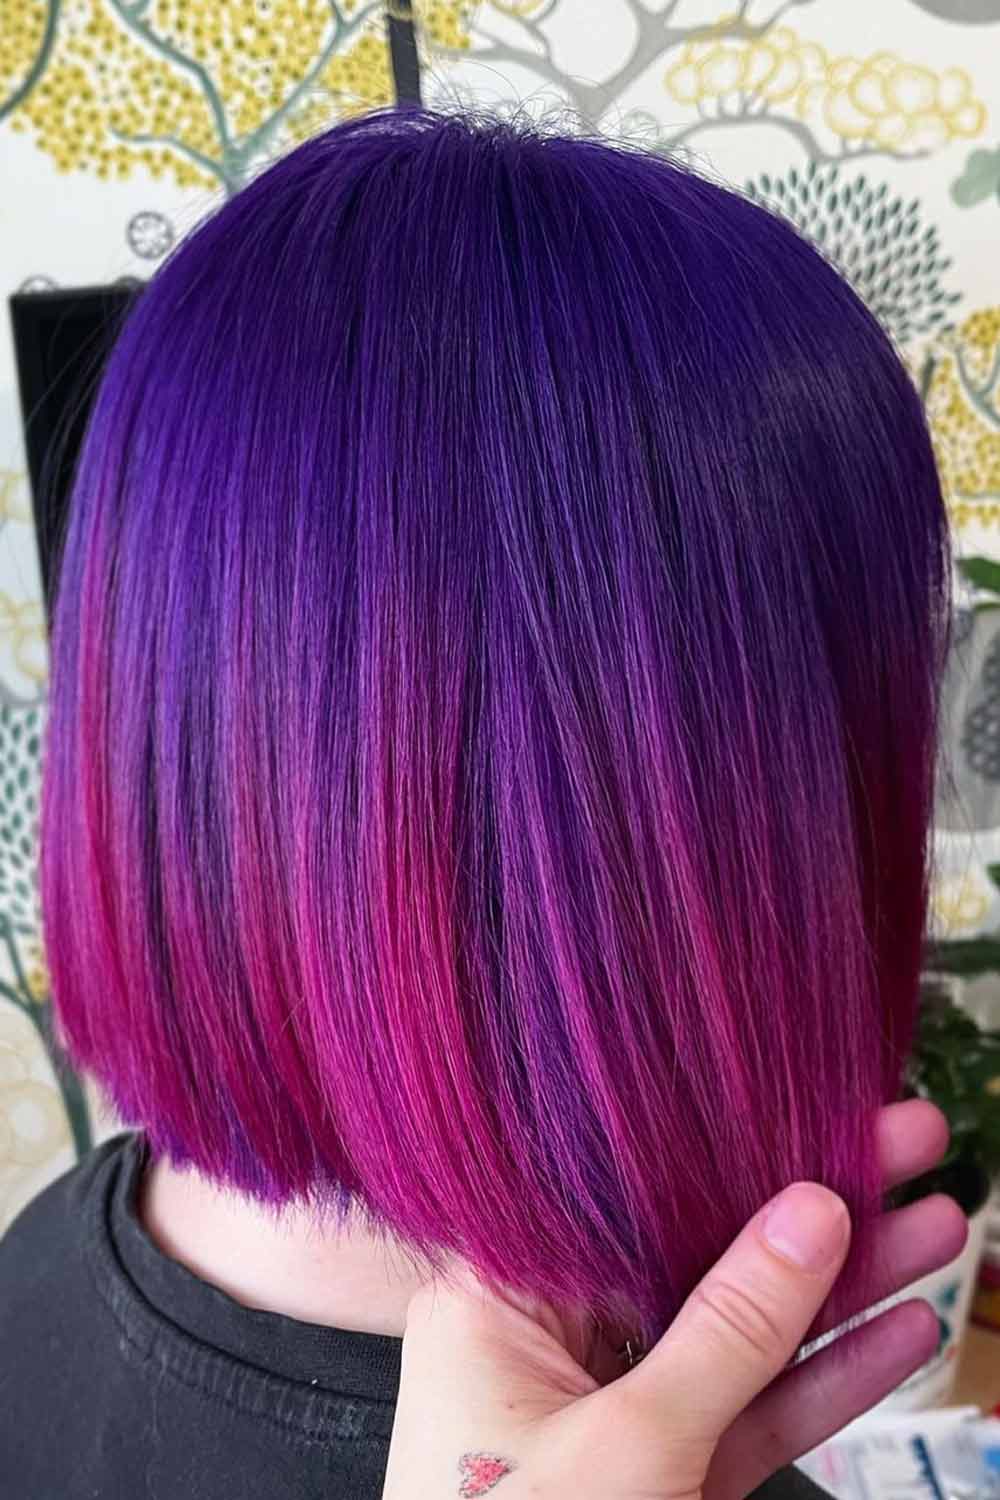 Purple Ombre Hair: What Makes It a Popular Trend